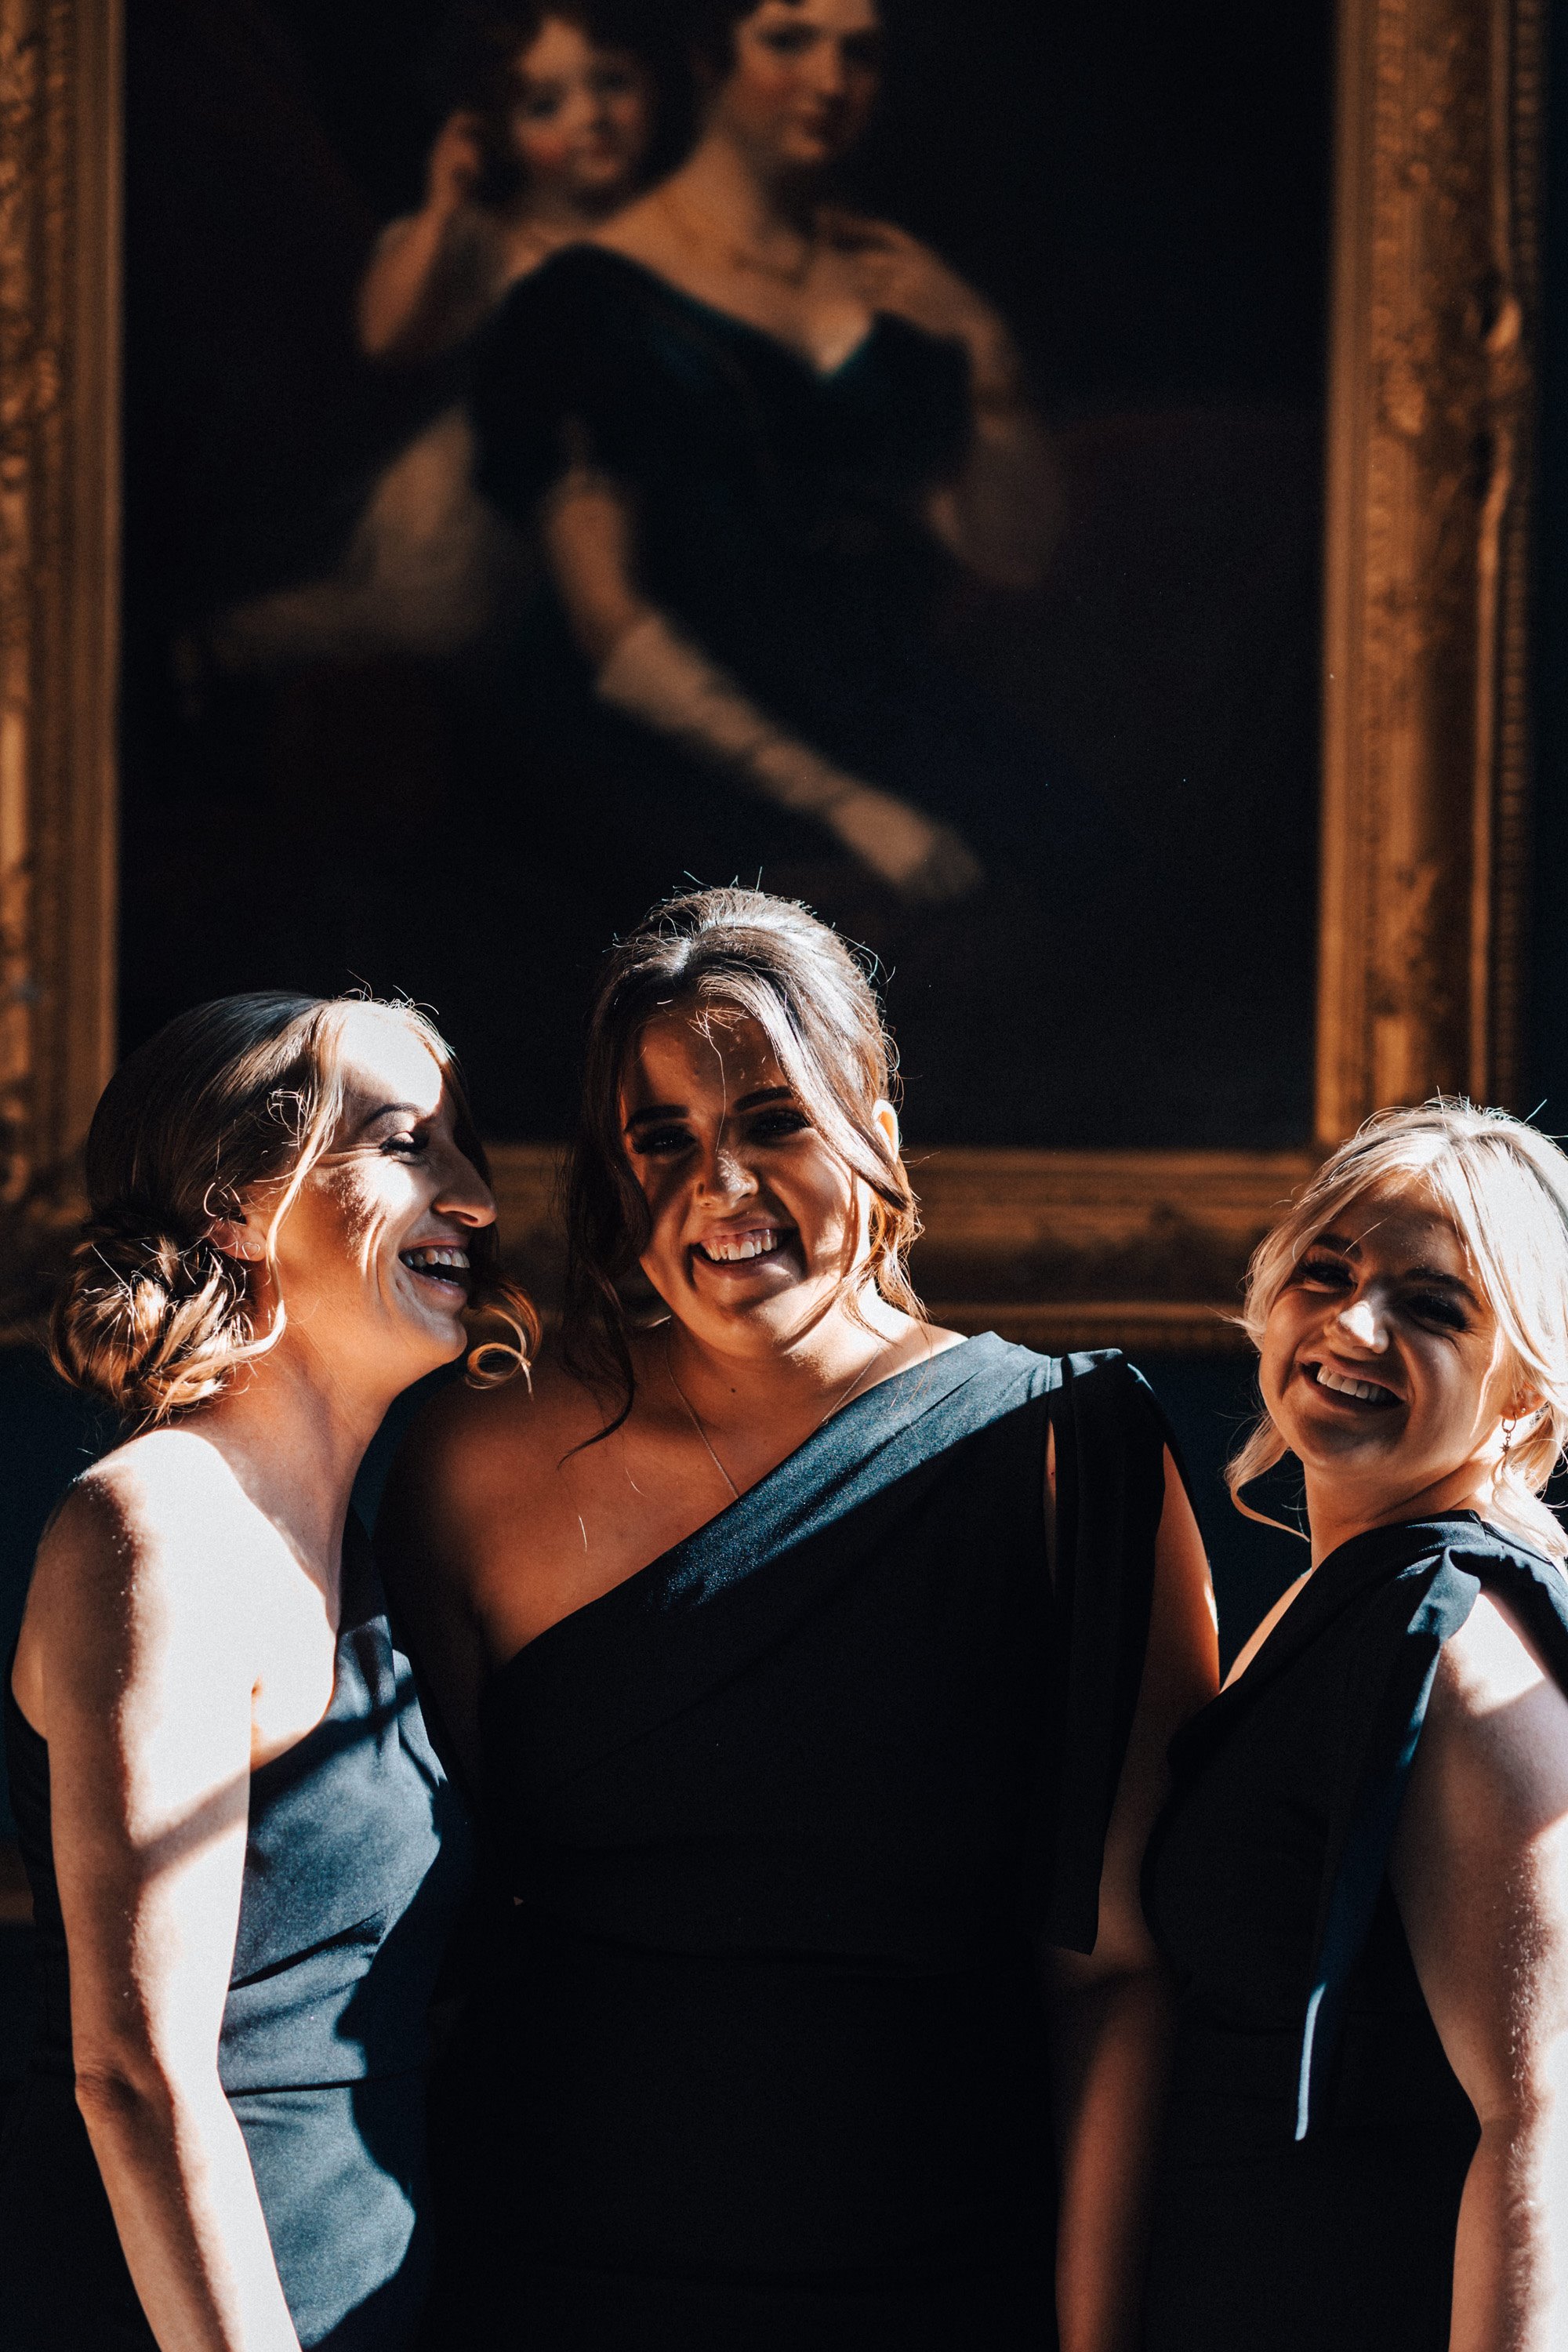 Bridesmaids in black dresses for a Rock n roll wedding style near Halloween in October in a English country house